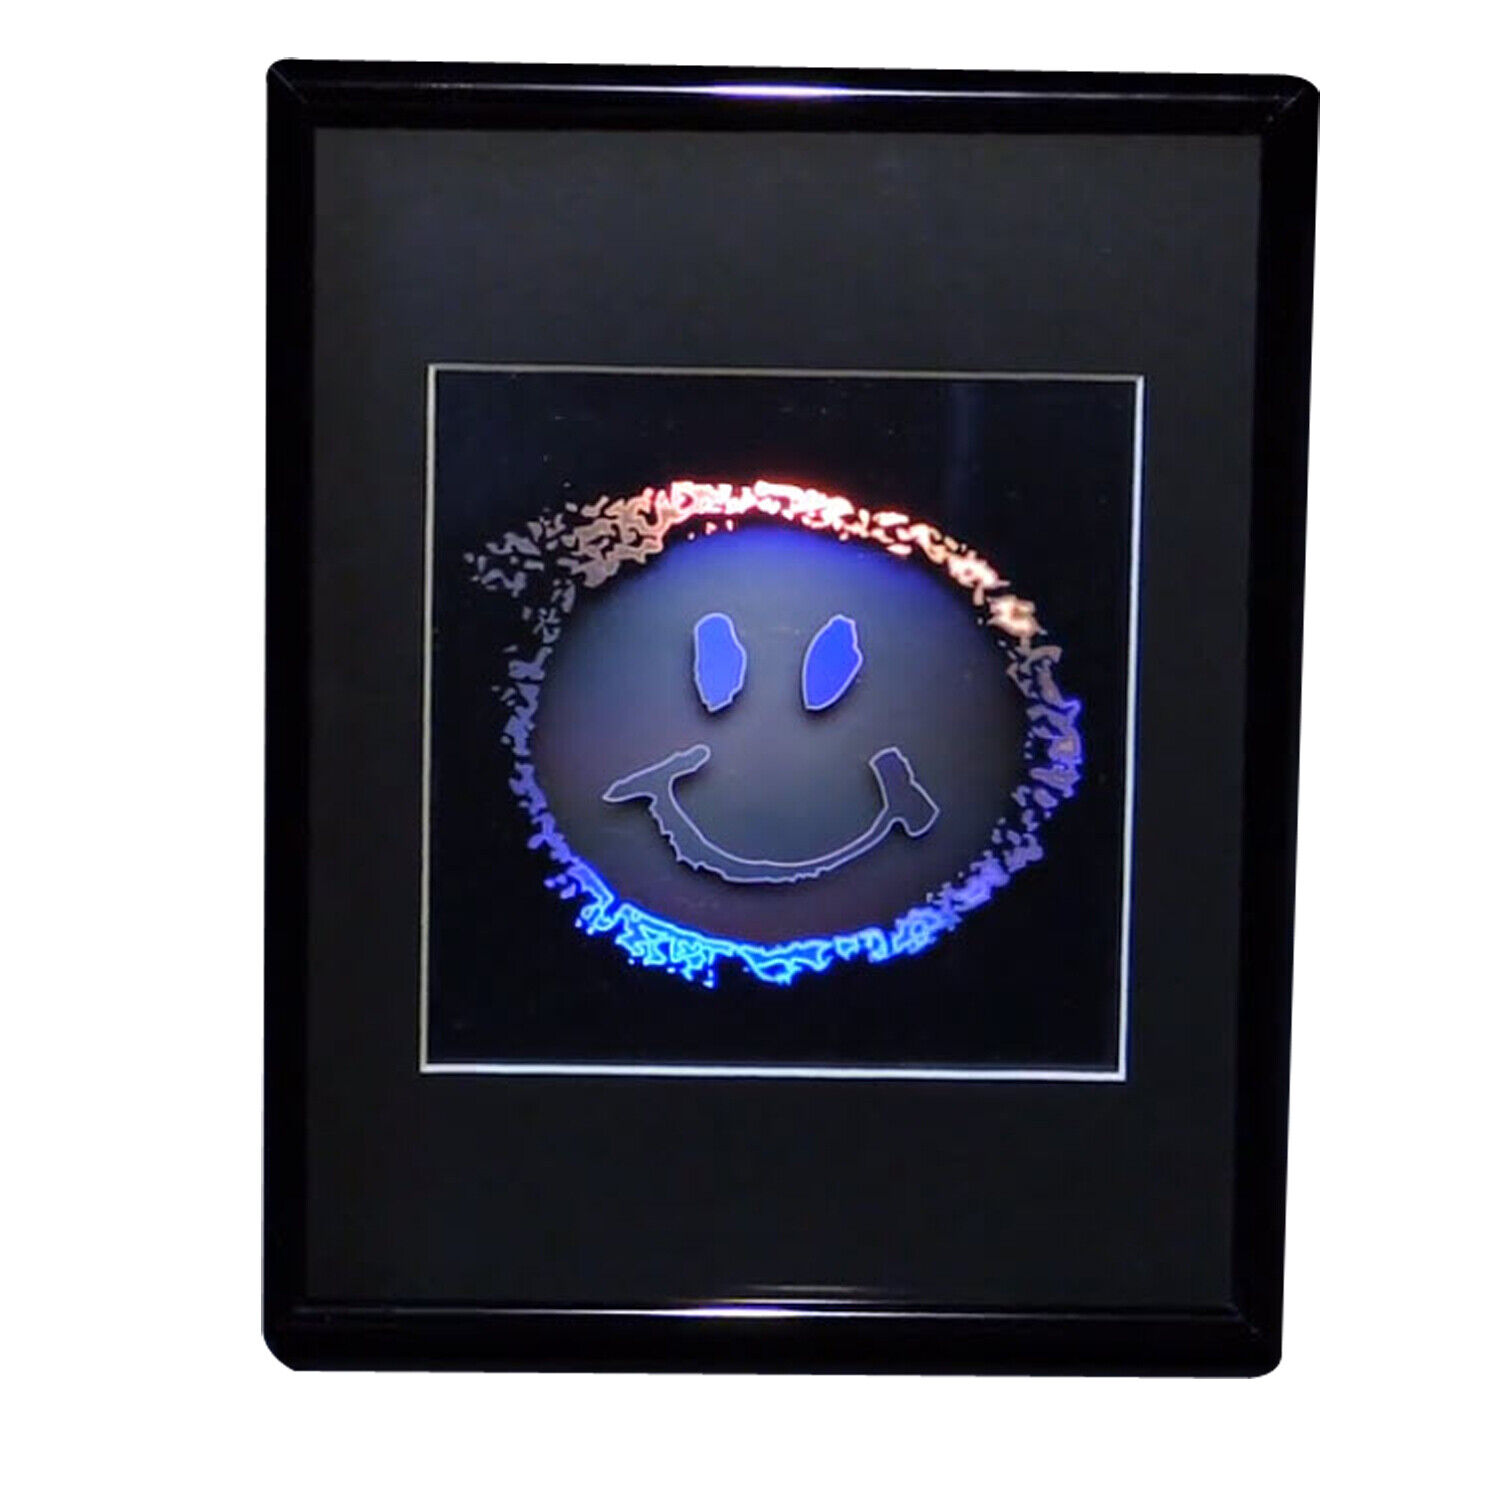 Smiley Face 2D/3D Collectible Hologram Picture - EMBOSSED - Matted